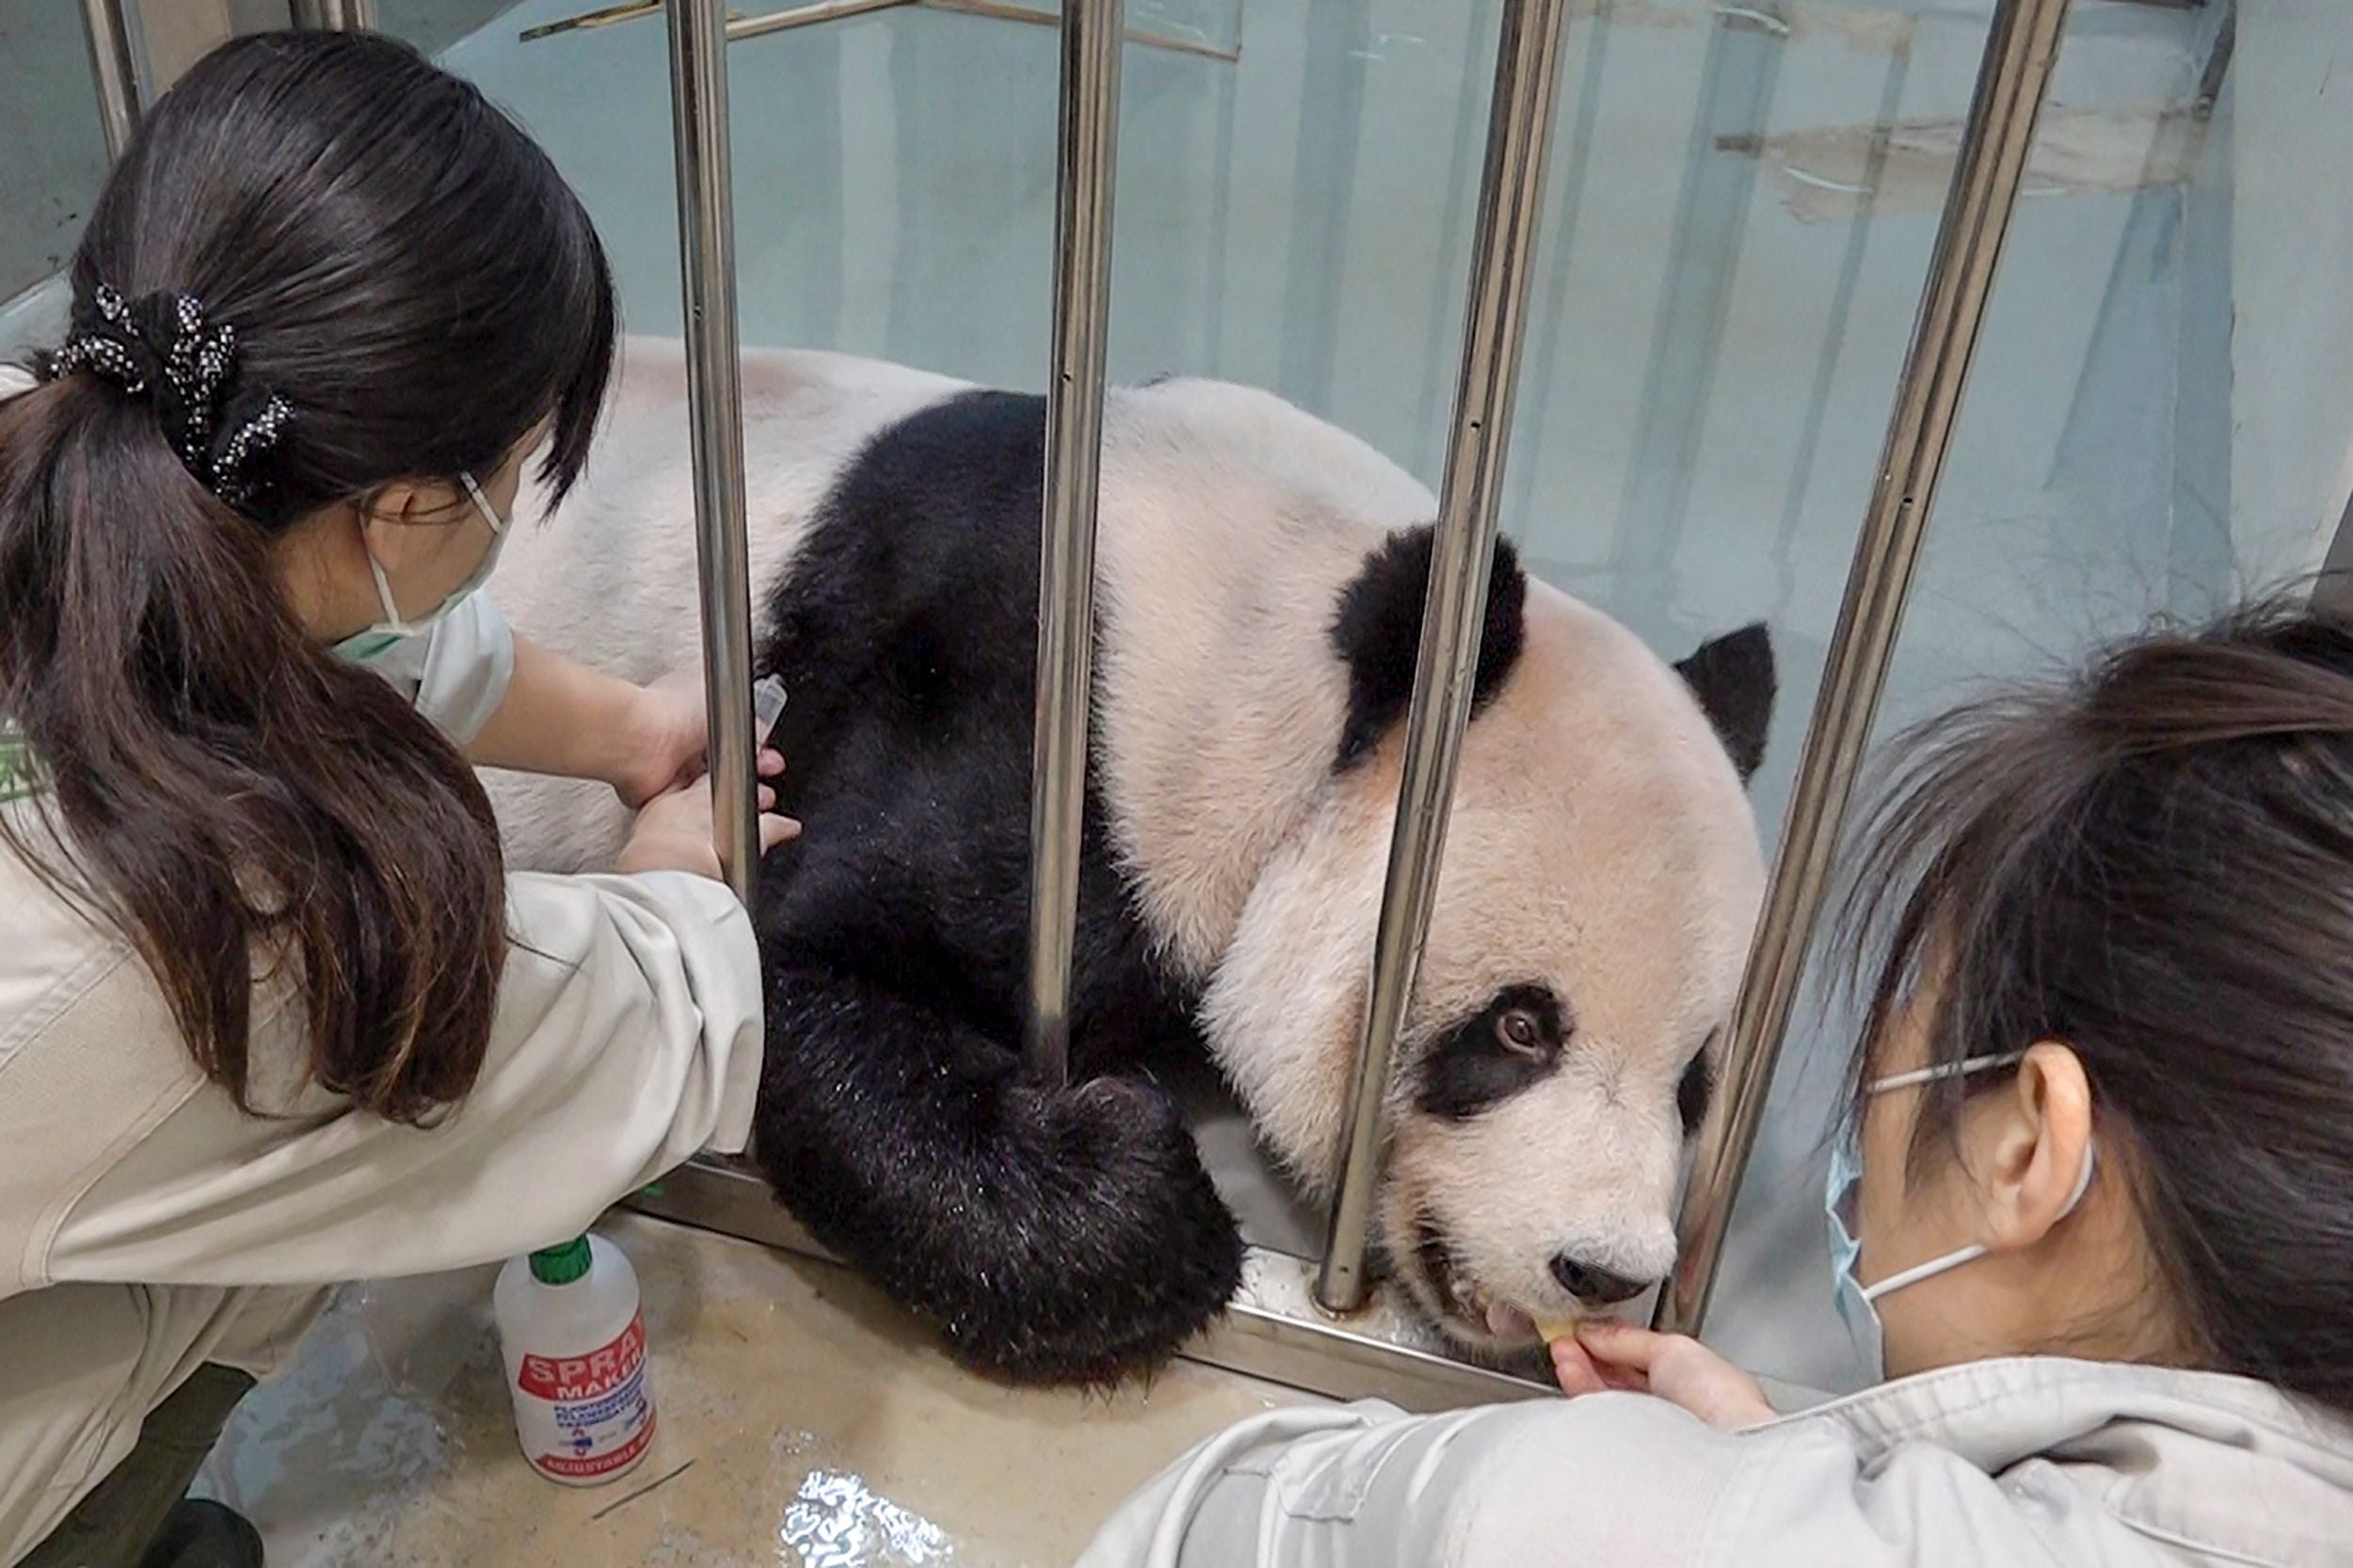 Taiwan asks Chinese veterinary experts to help treat seriously ill male  panda | The Independent